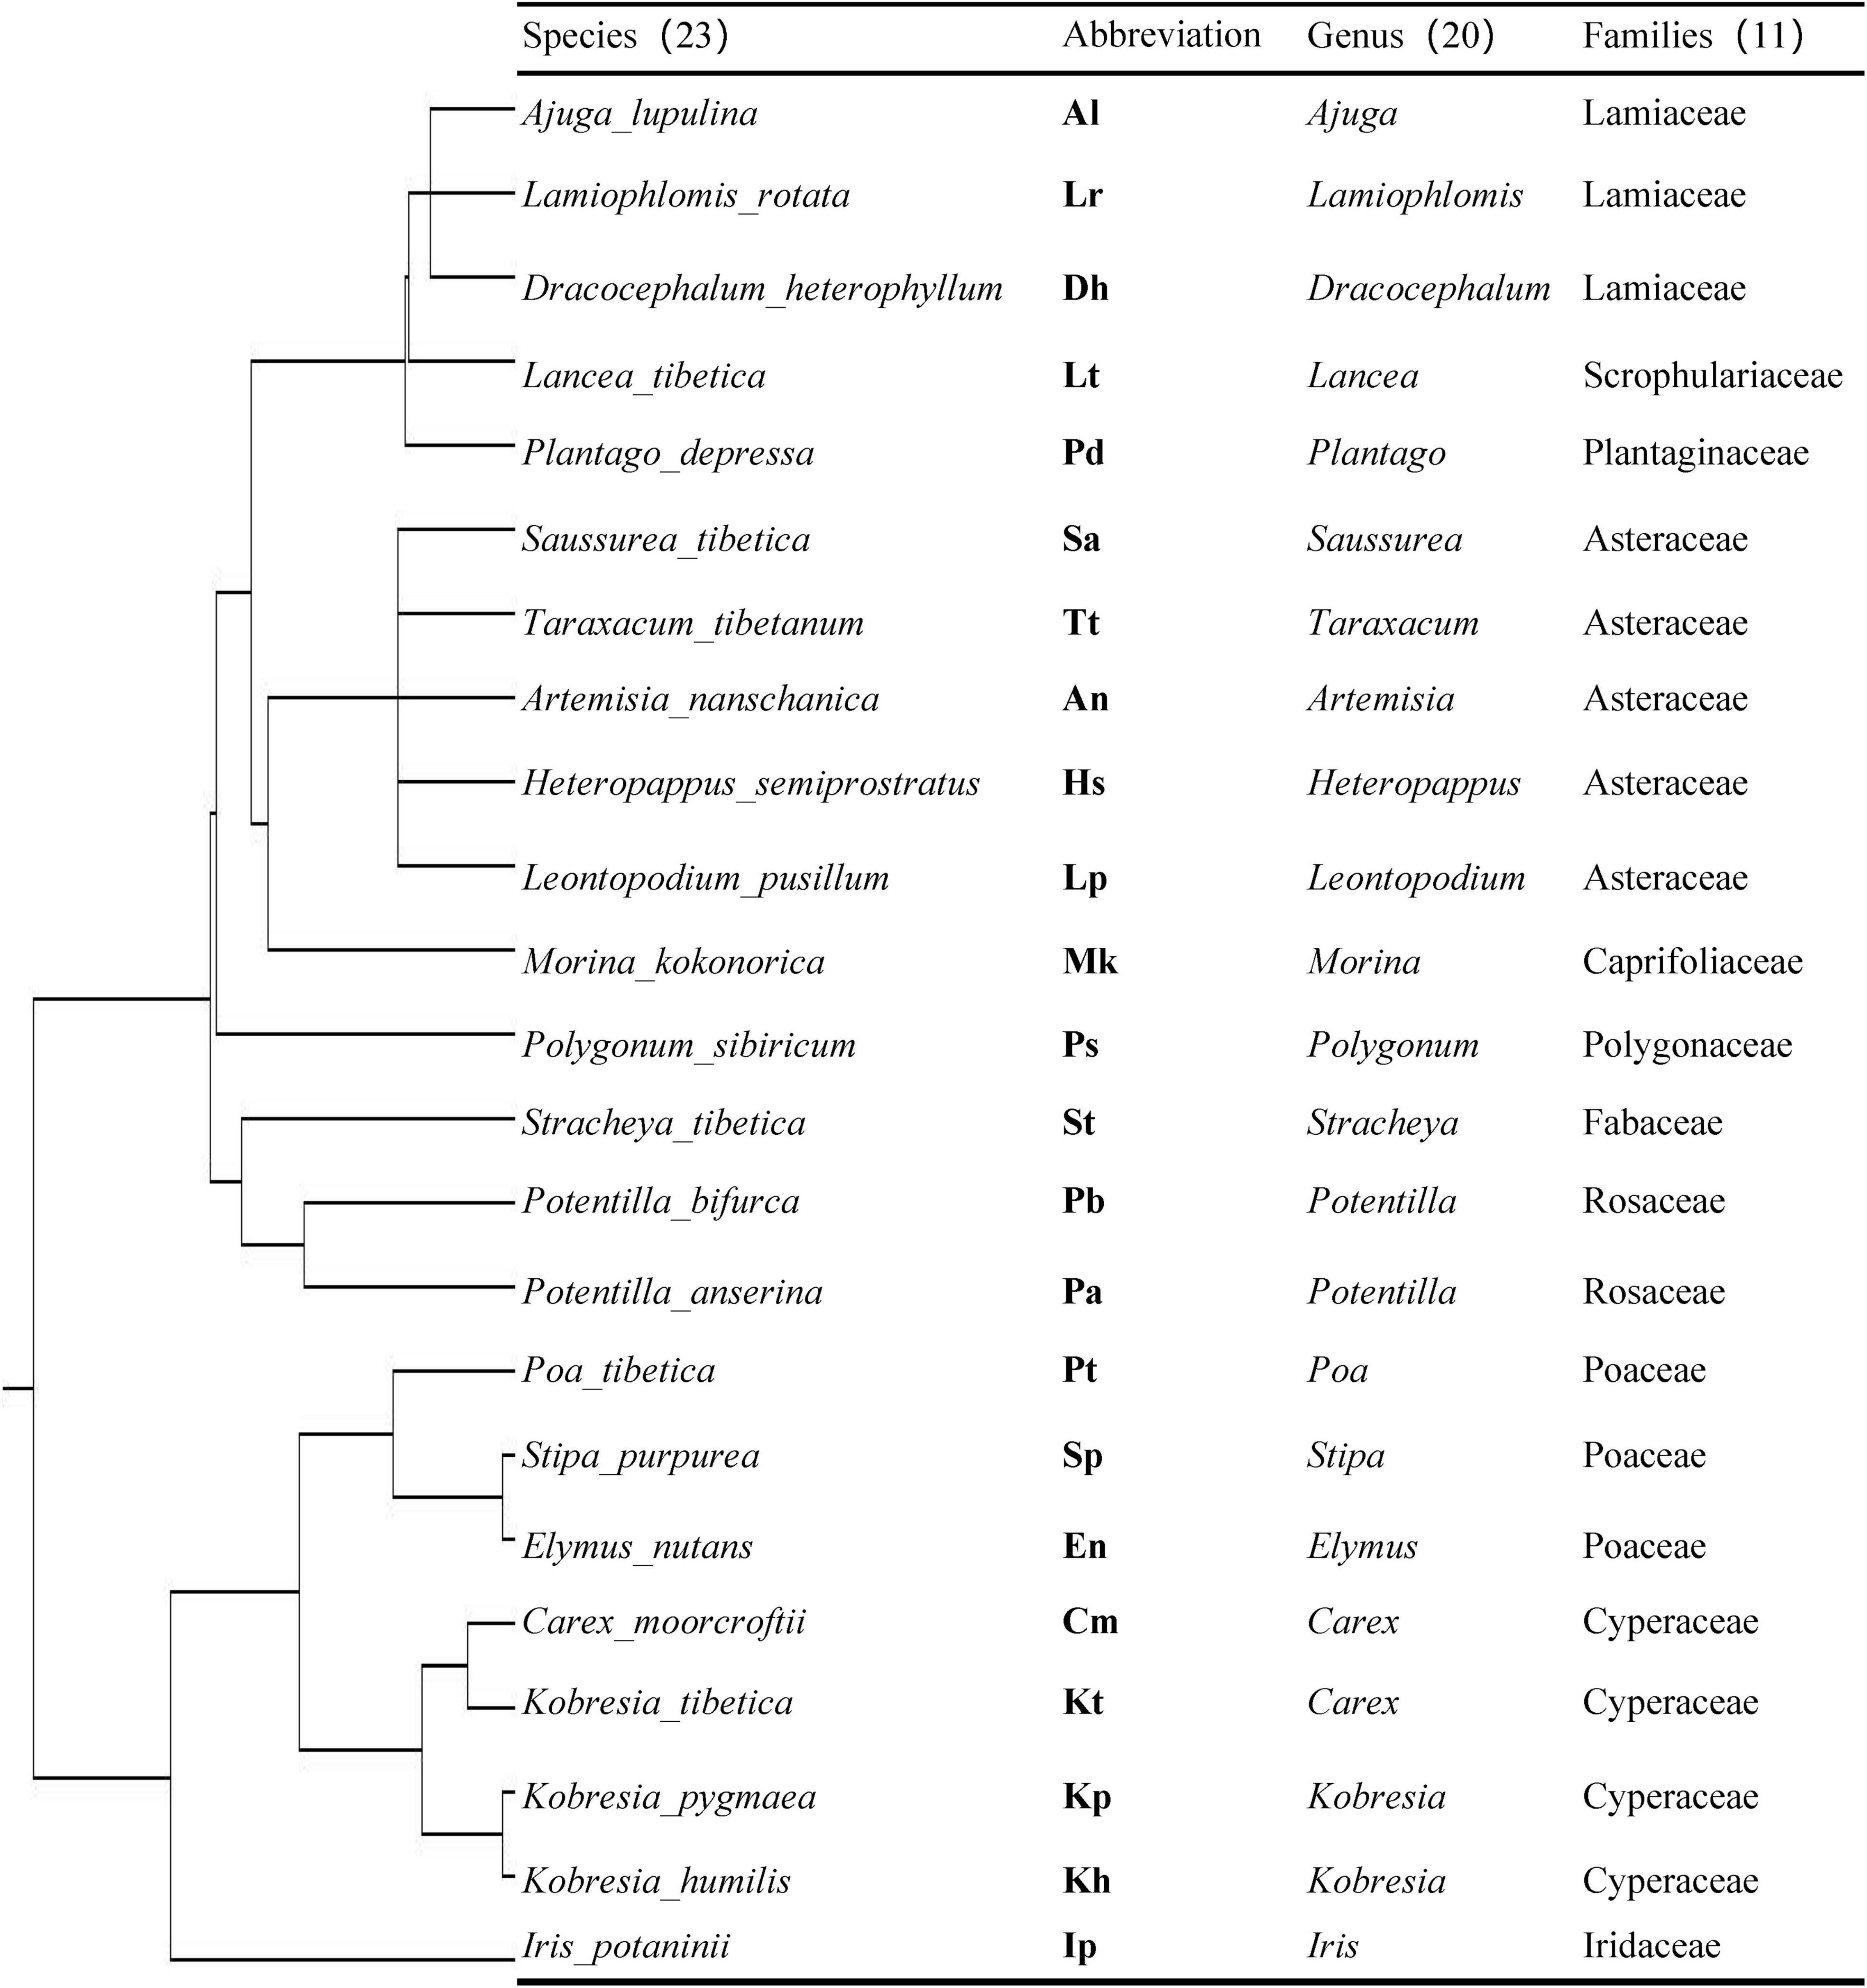 Frontiers | Phylogenetic and Symbiotic Network the Interdependence Between Plants and Arbuscular Mycorrhizal Fungi in a Tibetan Alpine Meadow